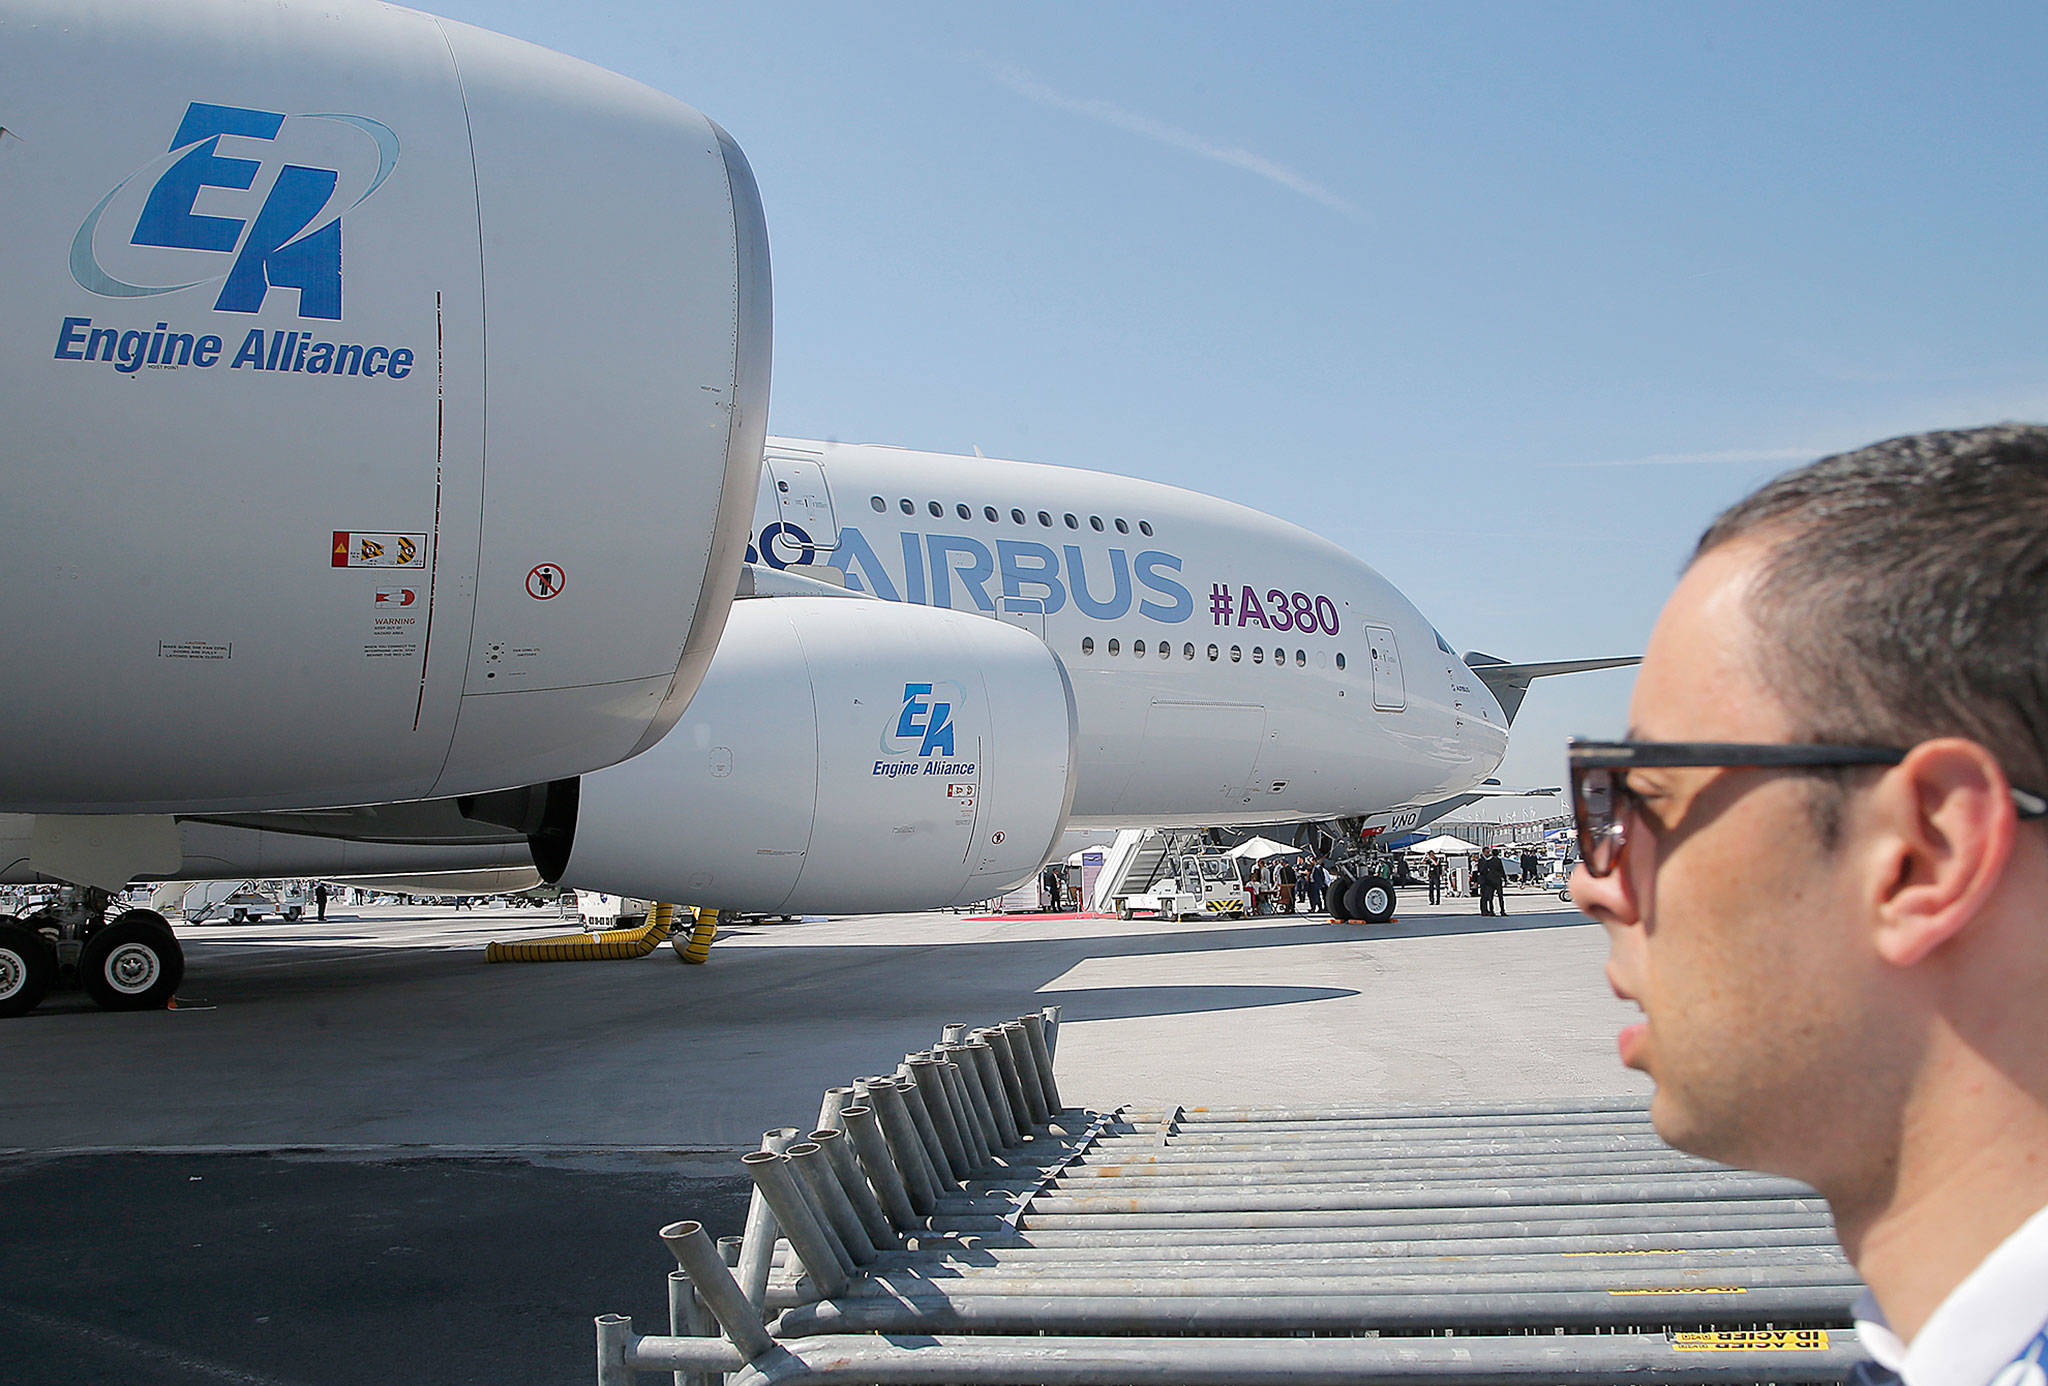 A man looks at an Airbus A380 at the Paris Air Show in France in June. (AP Photo/Michel Euler)